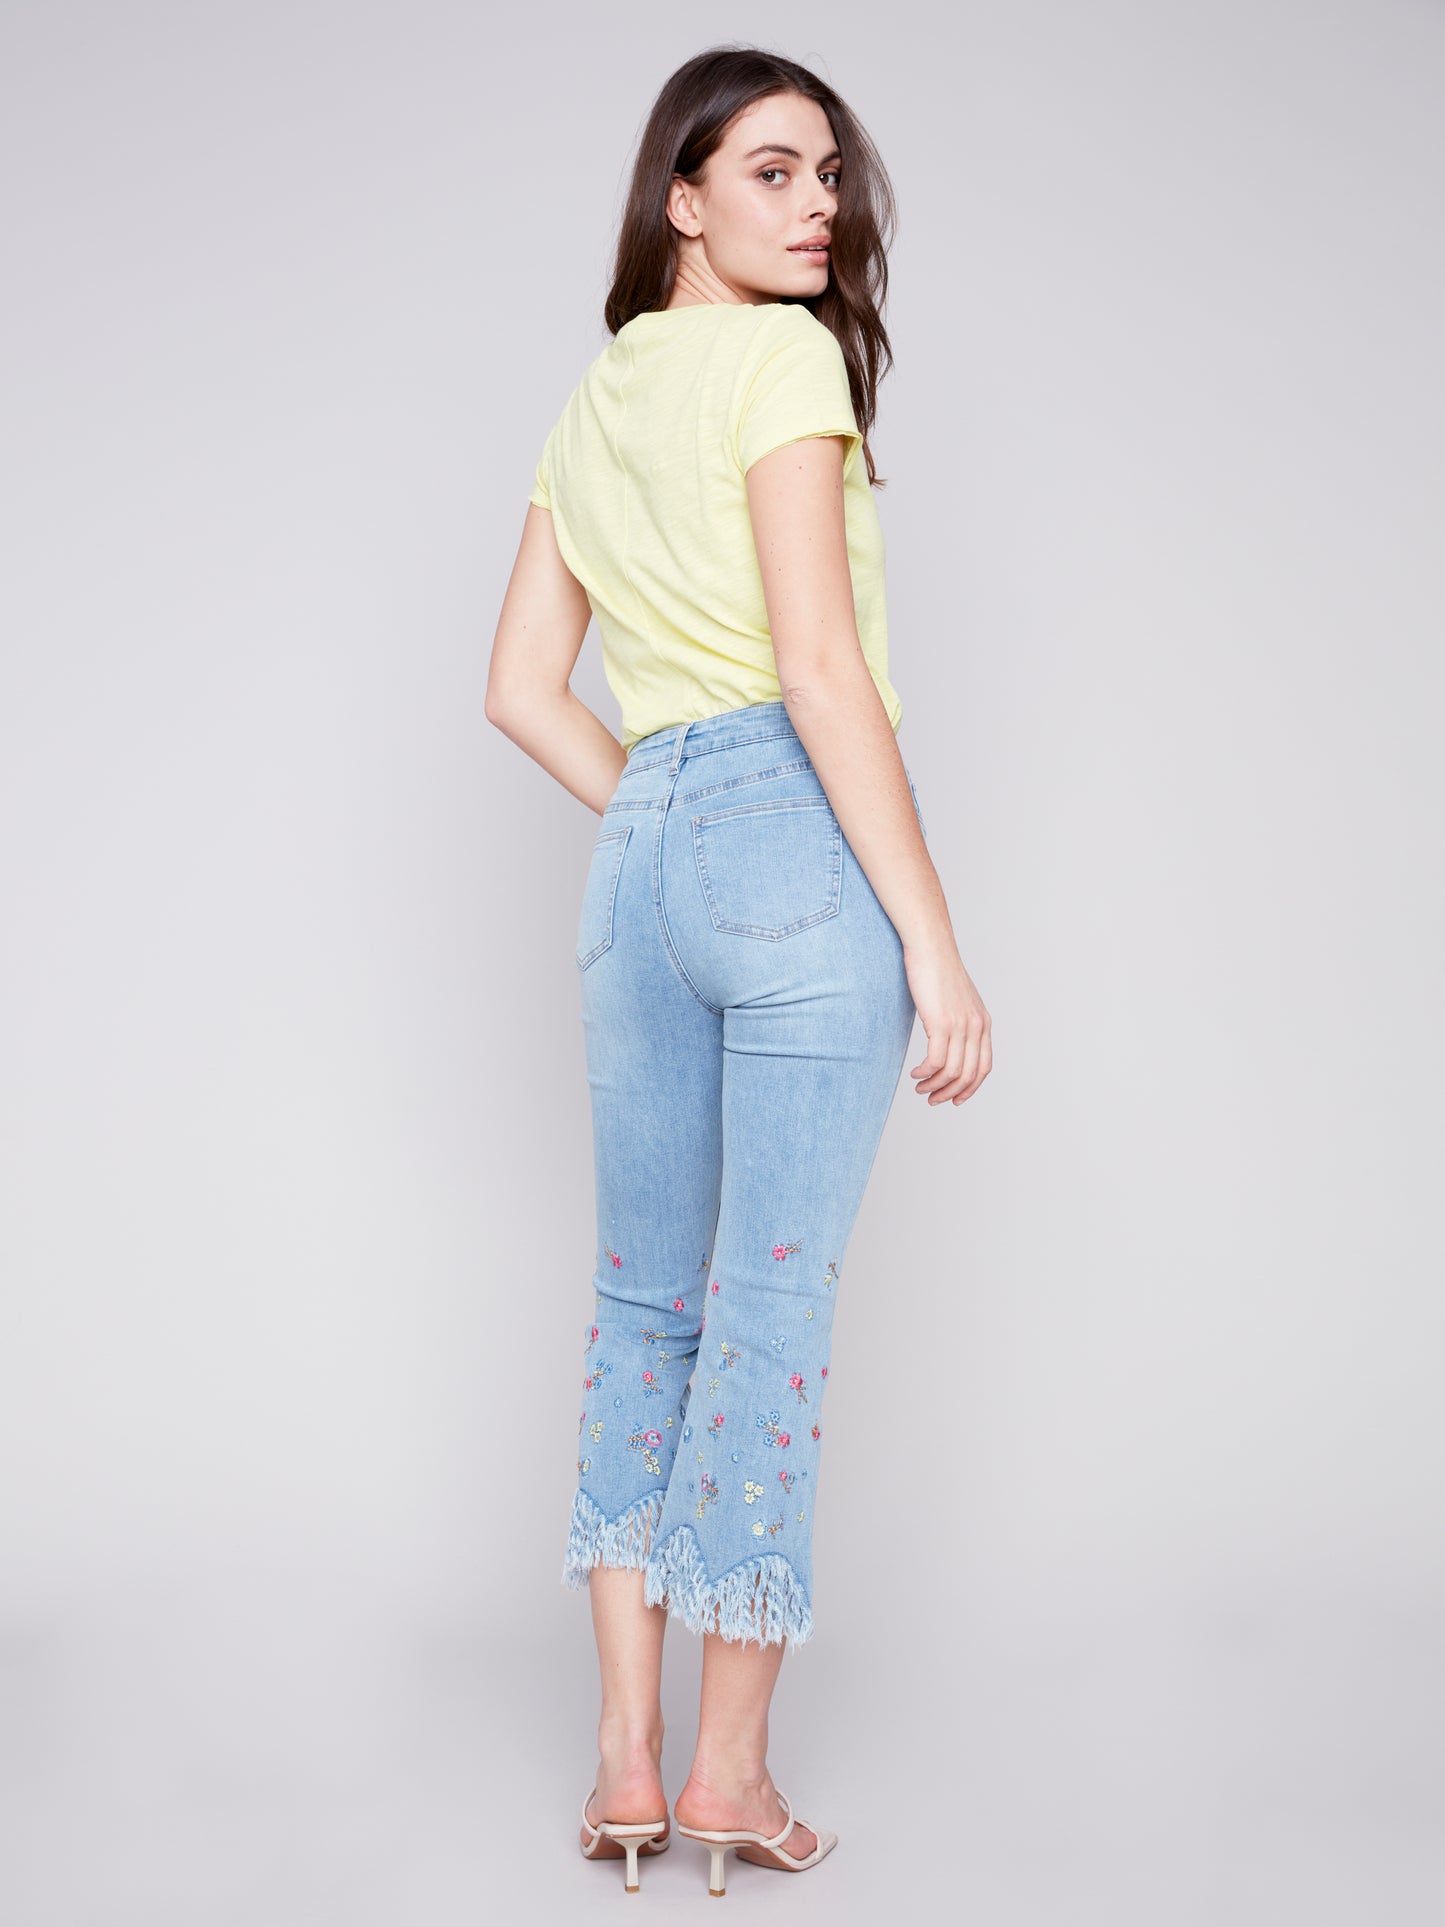 Woman modeling casual attire with Charlie B stretch denim boot cut pants and a pastel t-shirt for a perfect fit.